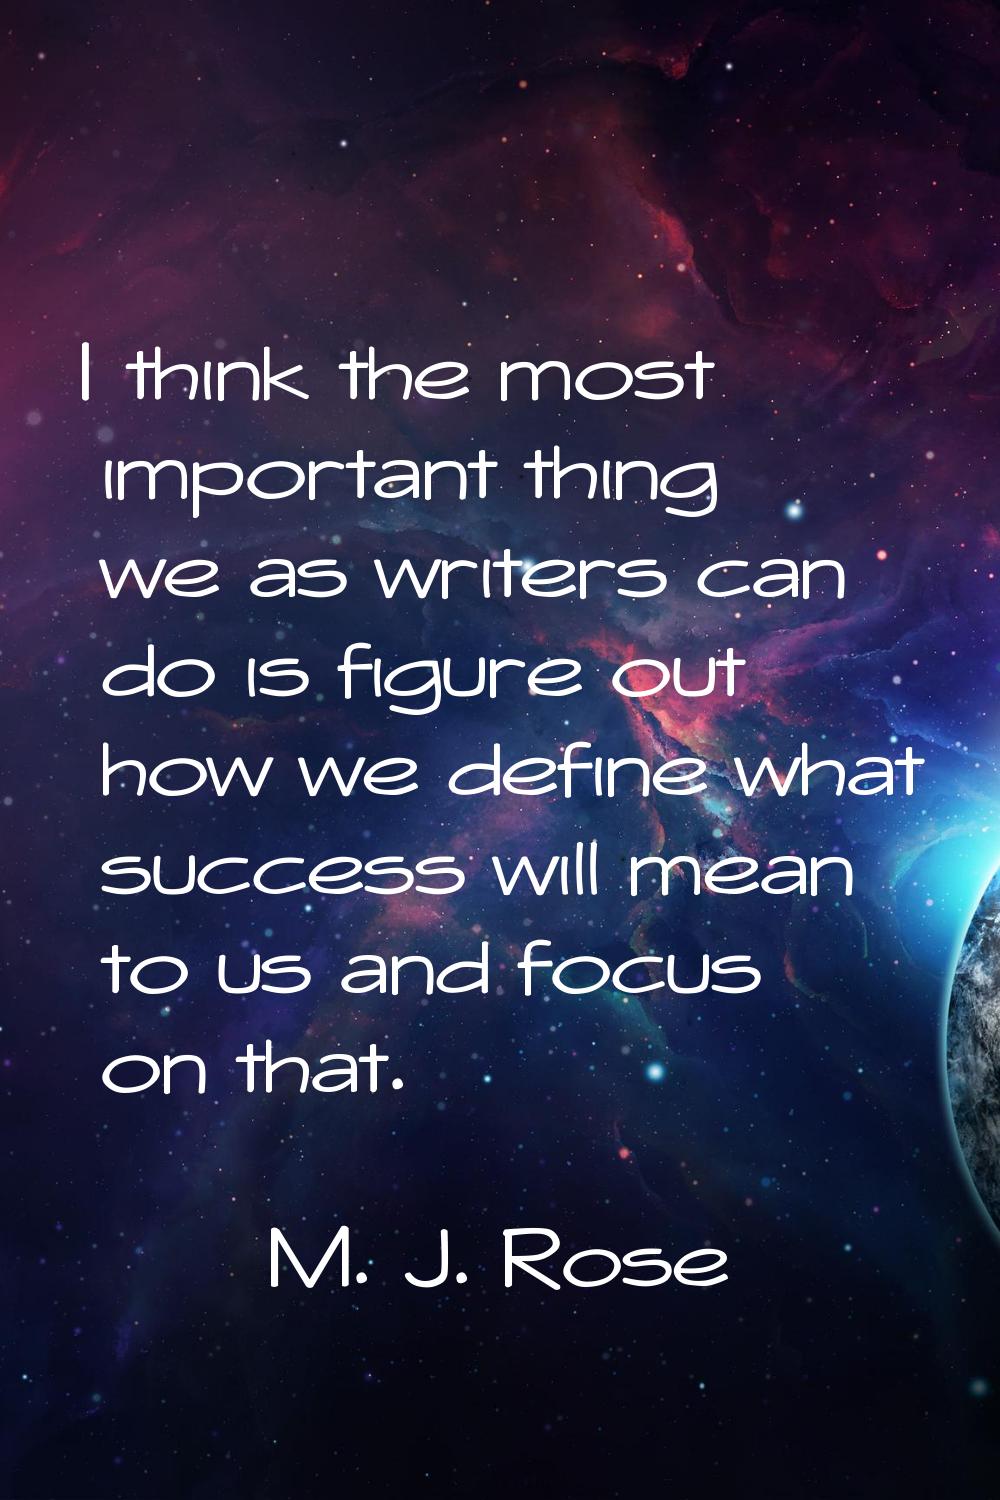 I think the most important thing we as writers can do is figure out how we define what success will